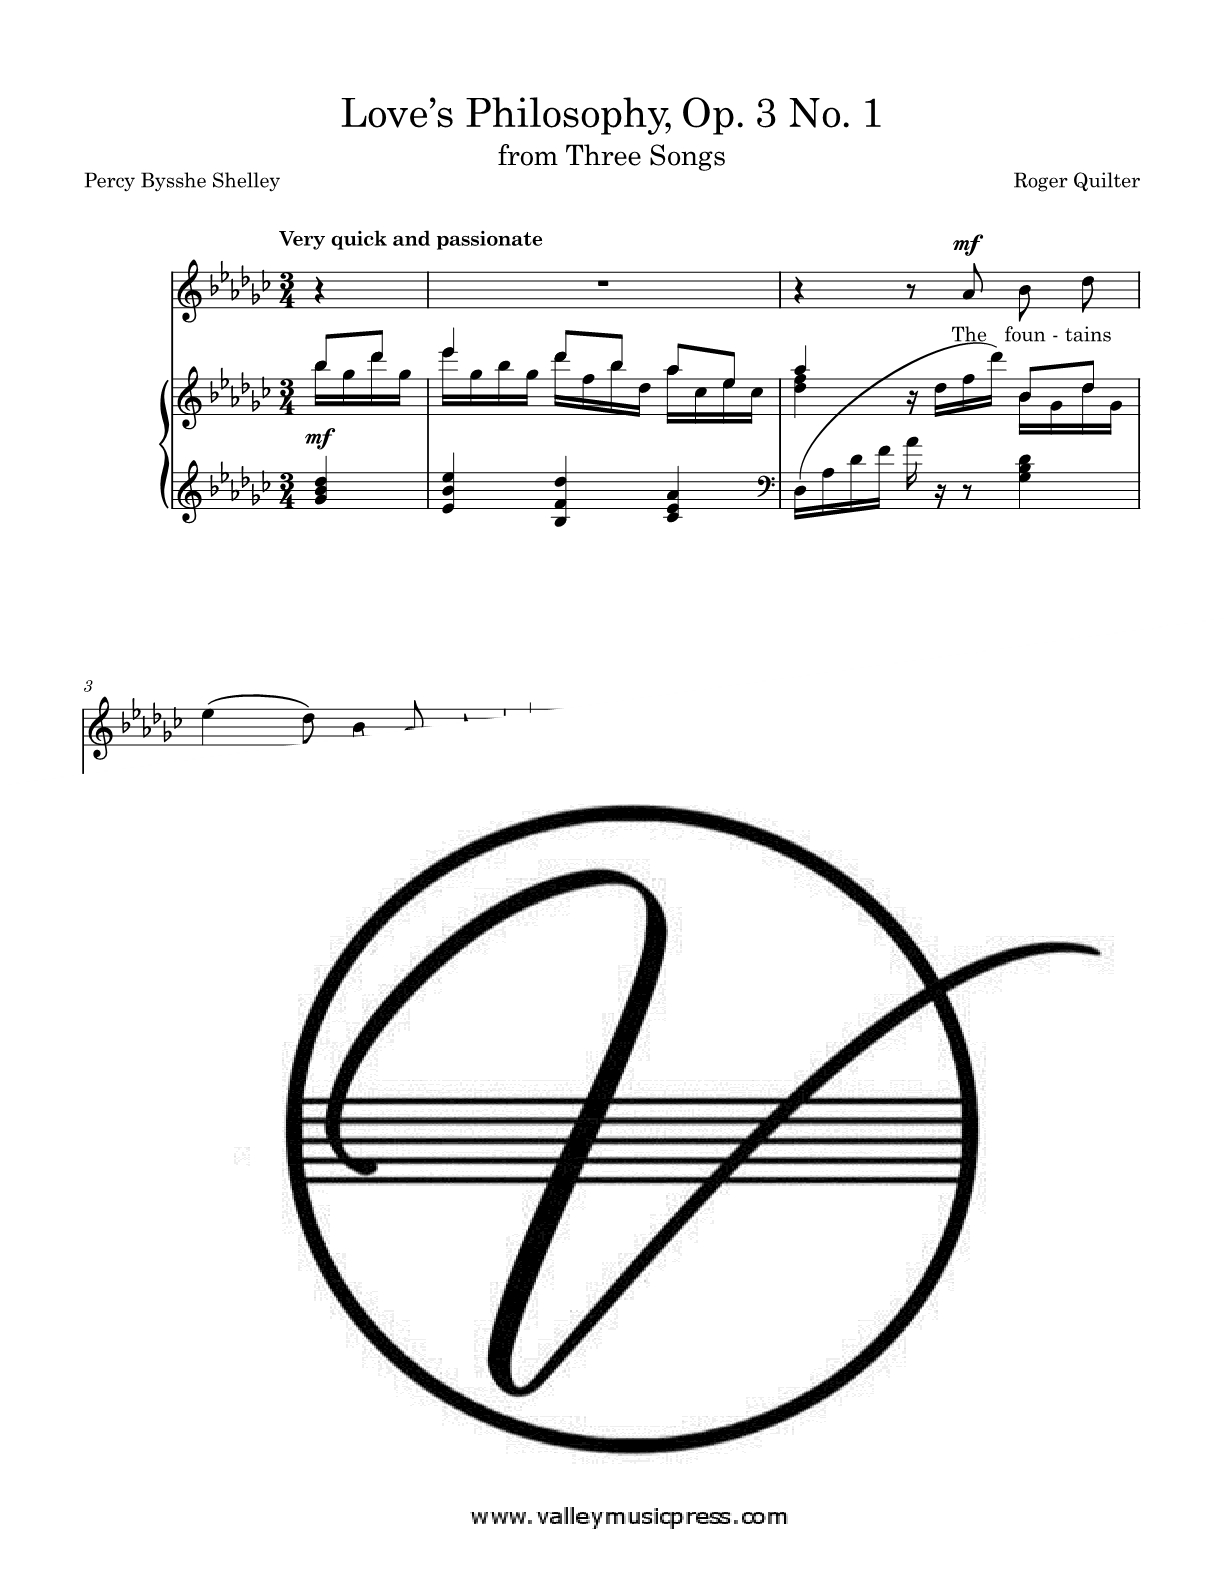 Quilter - Love's Philosophy Op. 3 No. 1 (Voice) - Click Image to Close